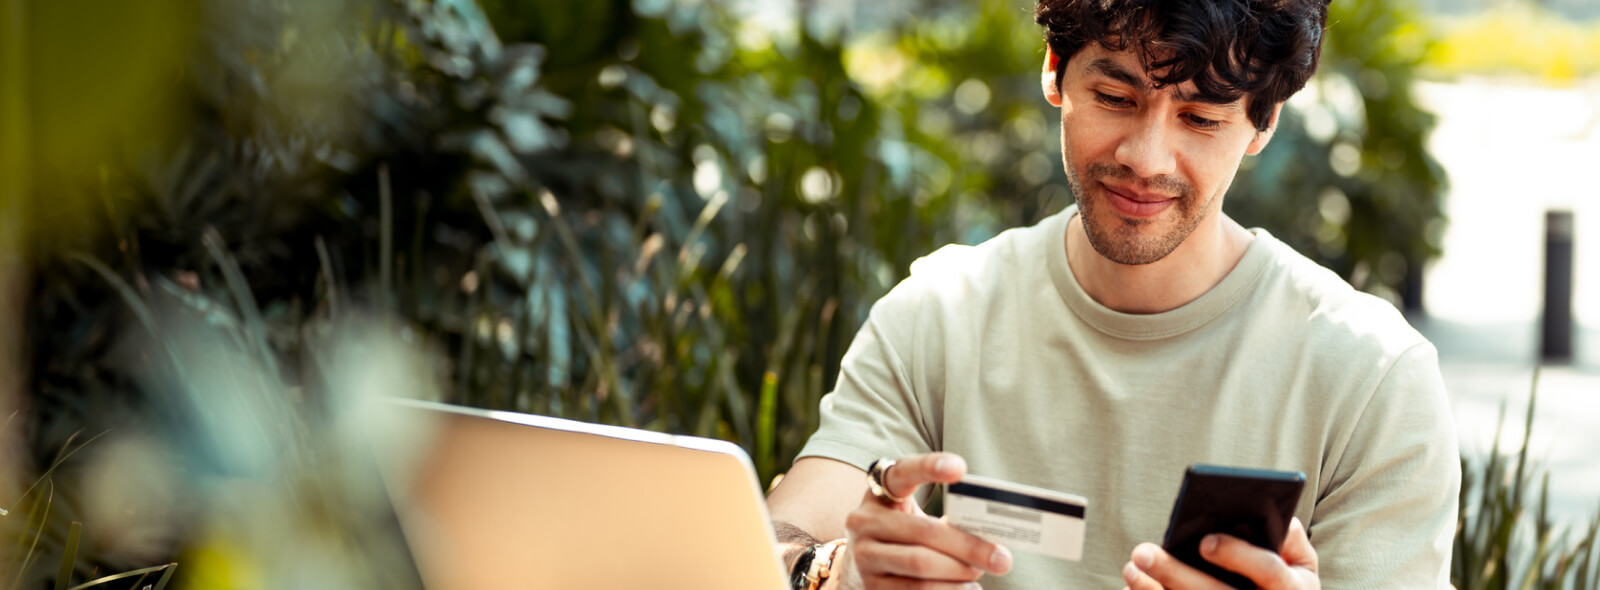 Young man holding mobile phone and credit/debit card outdoors